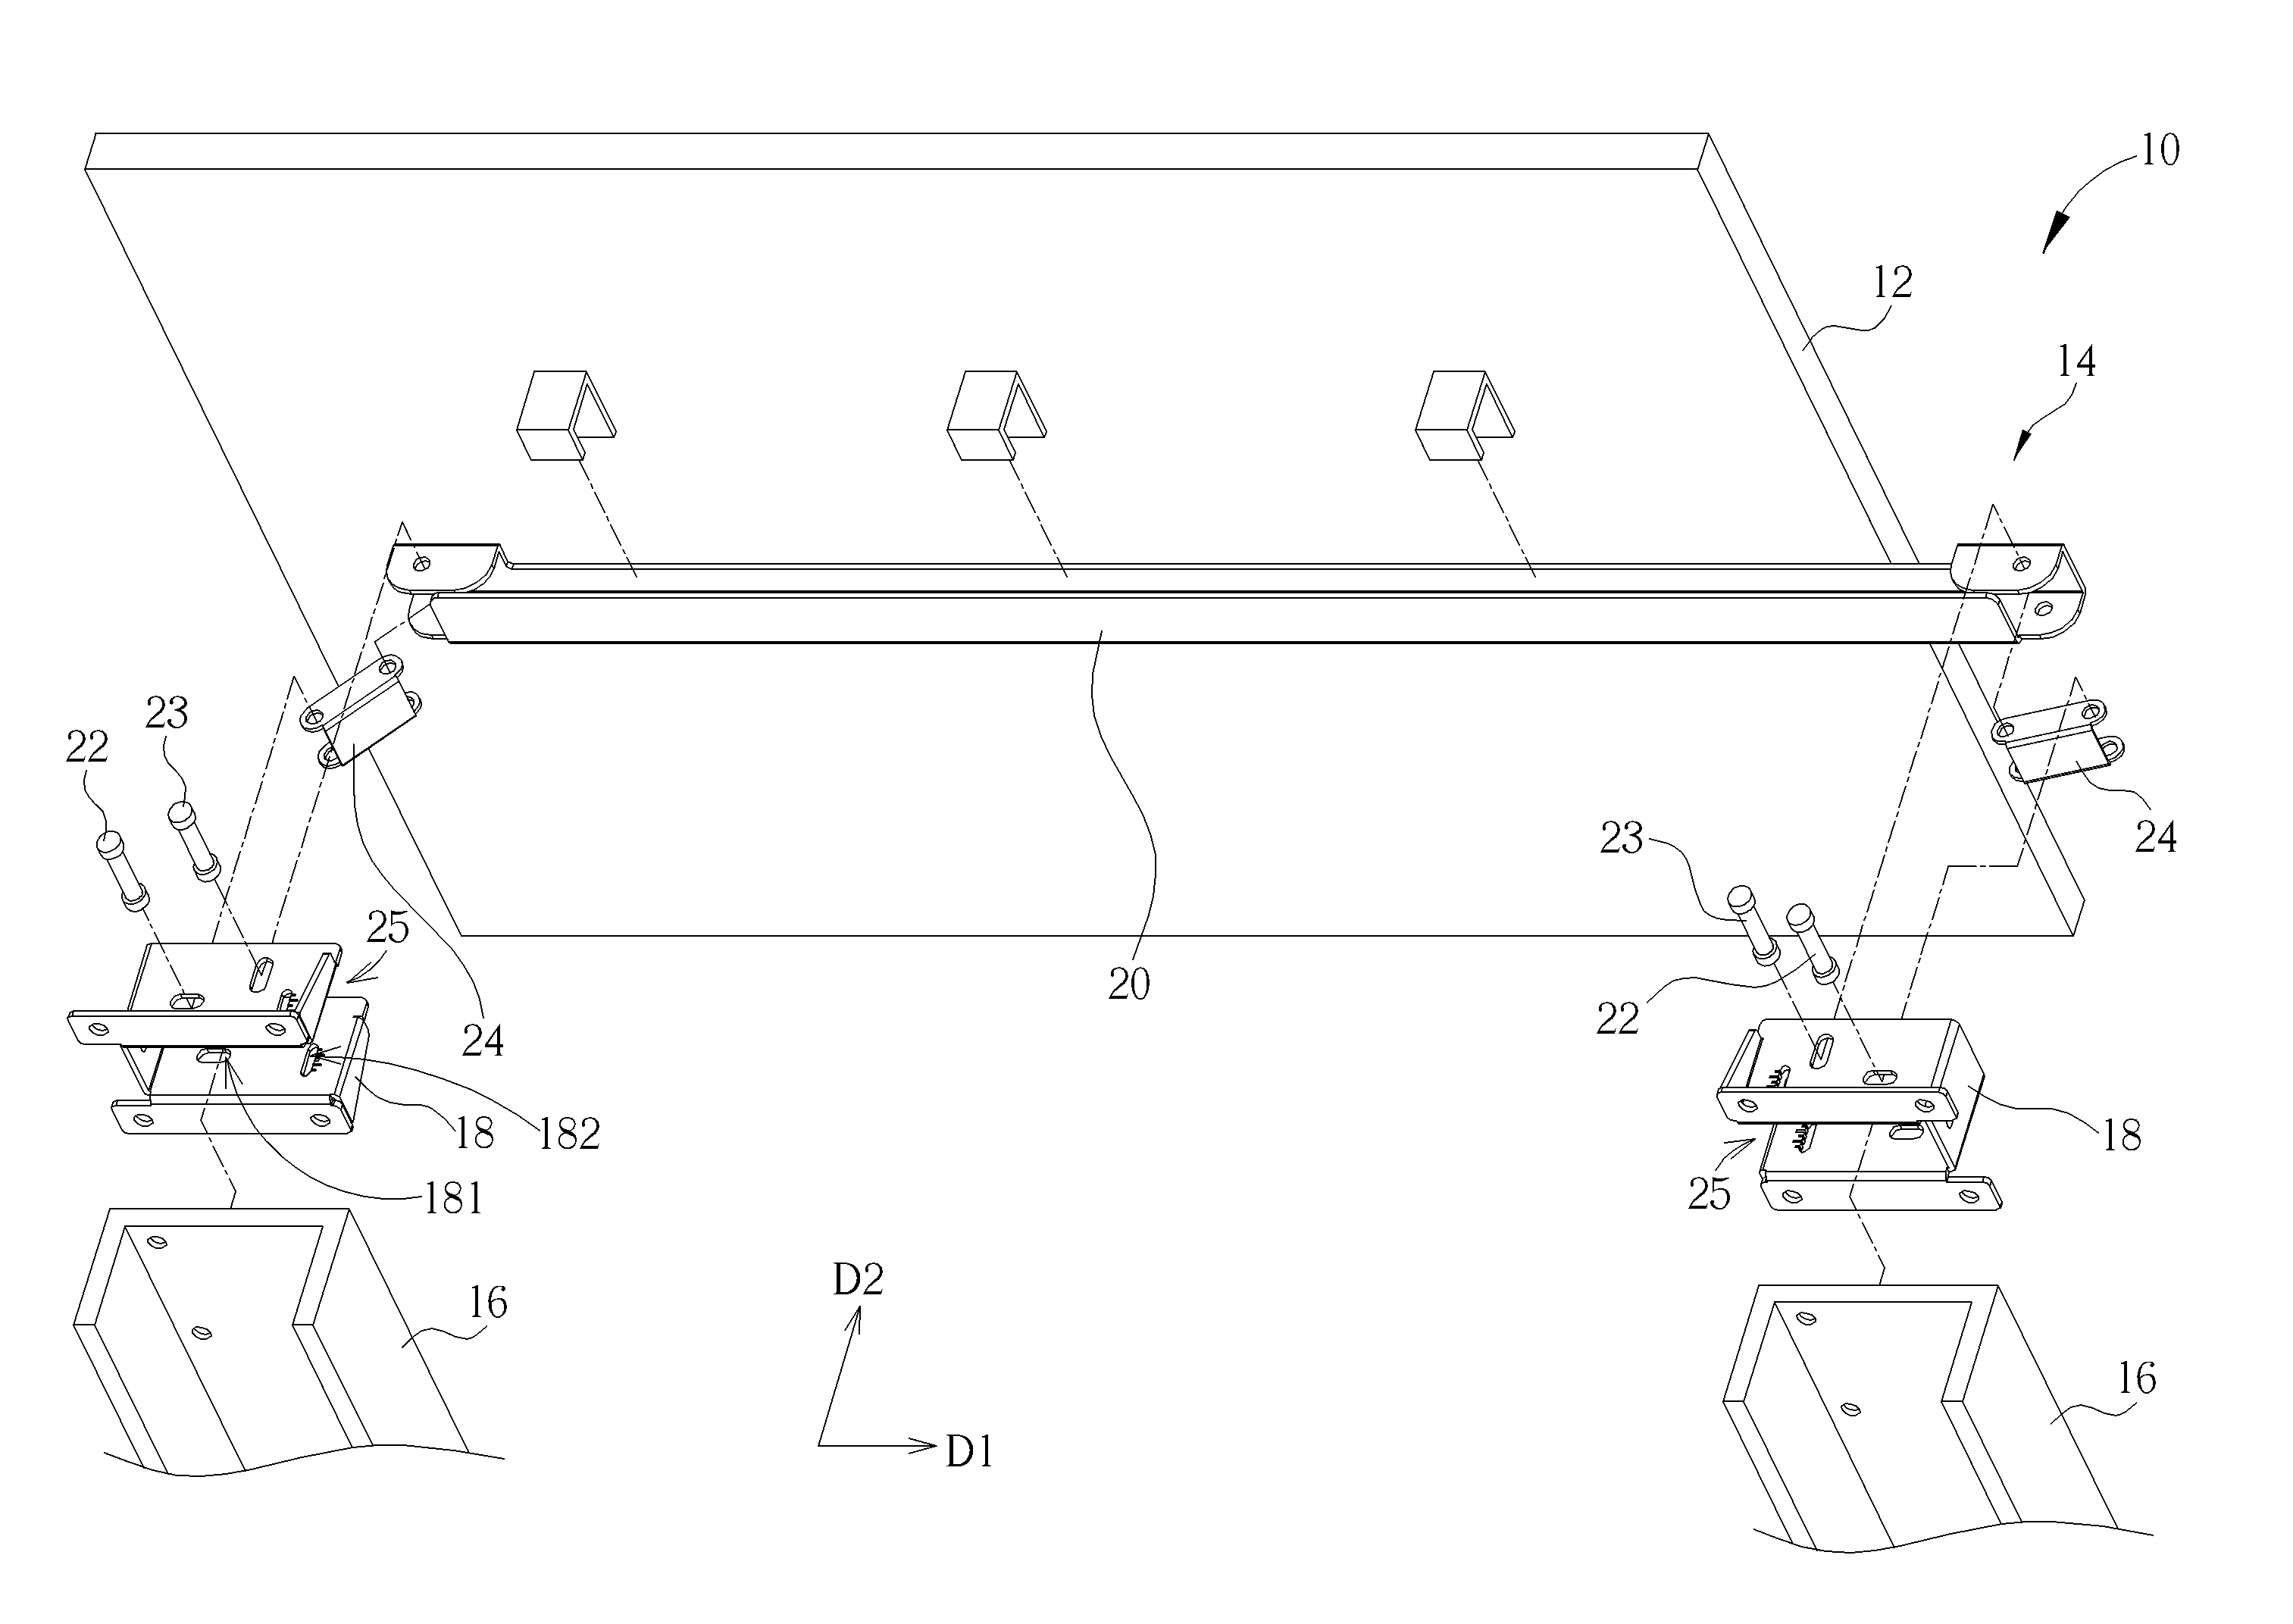 Adjusting mechanism for a display and related mounting system